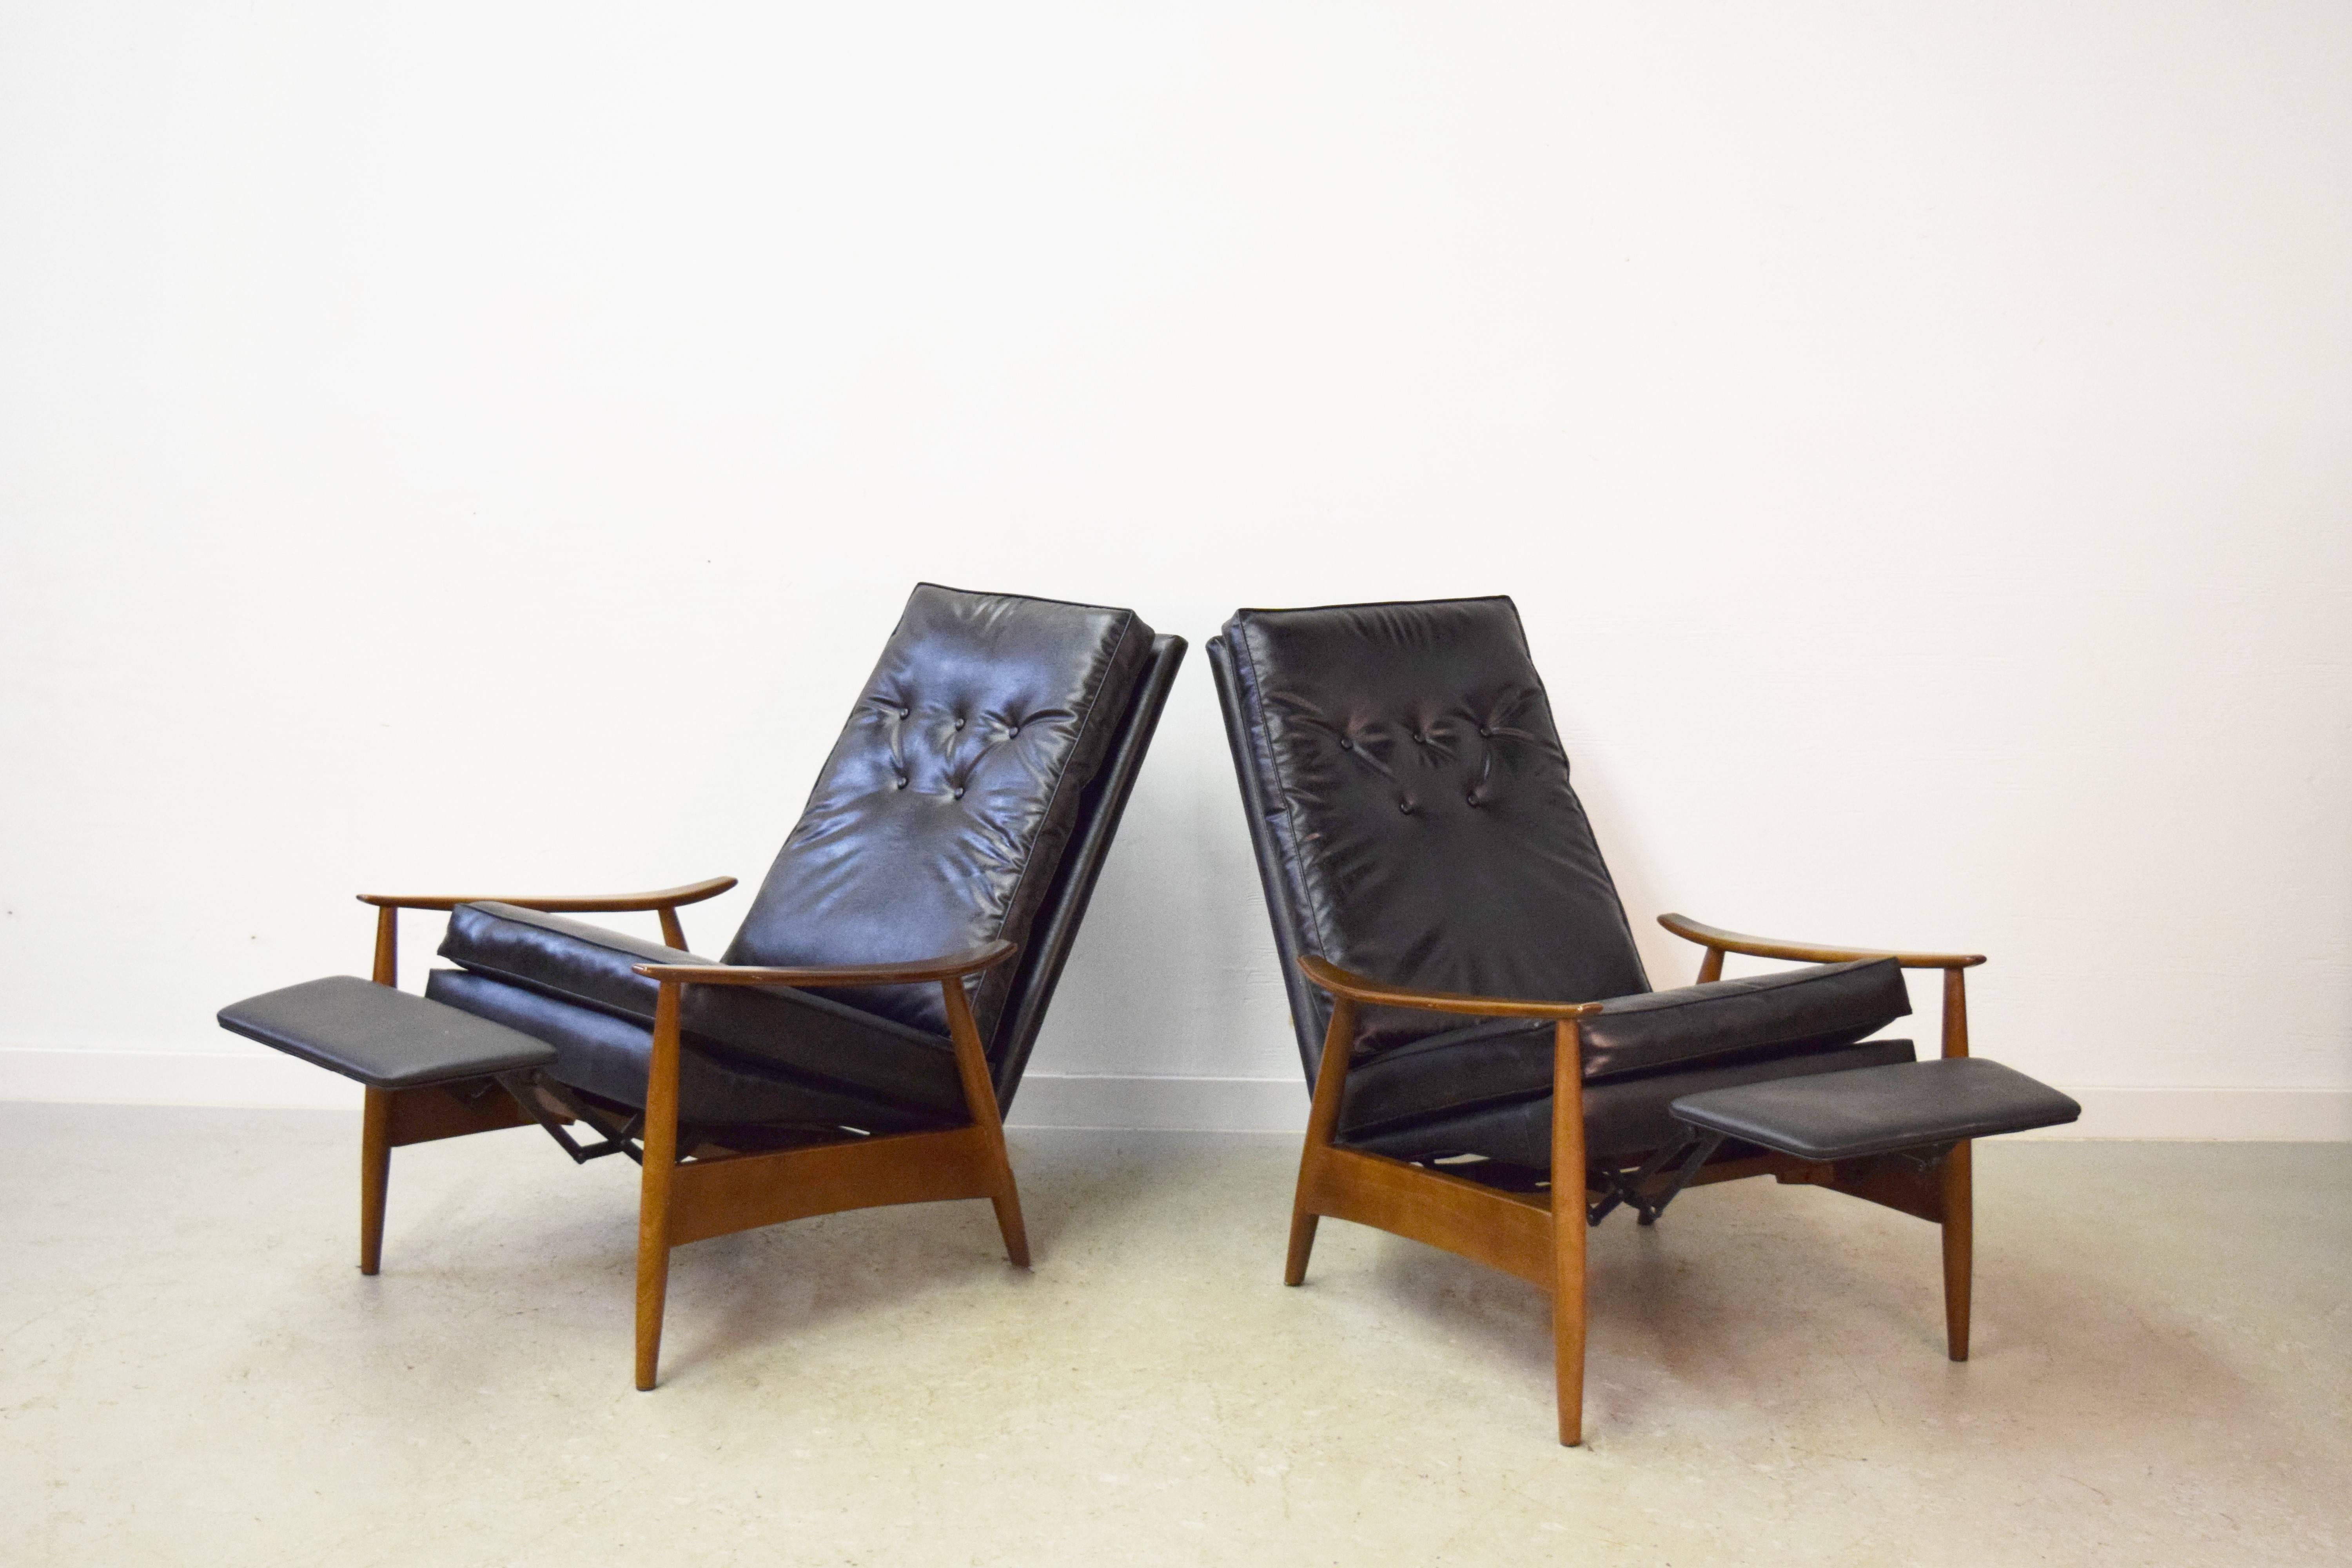 Pair of Milo Baughman recliner lounge chairs.